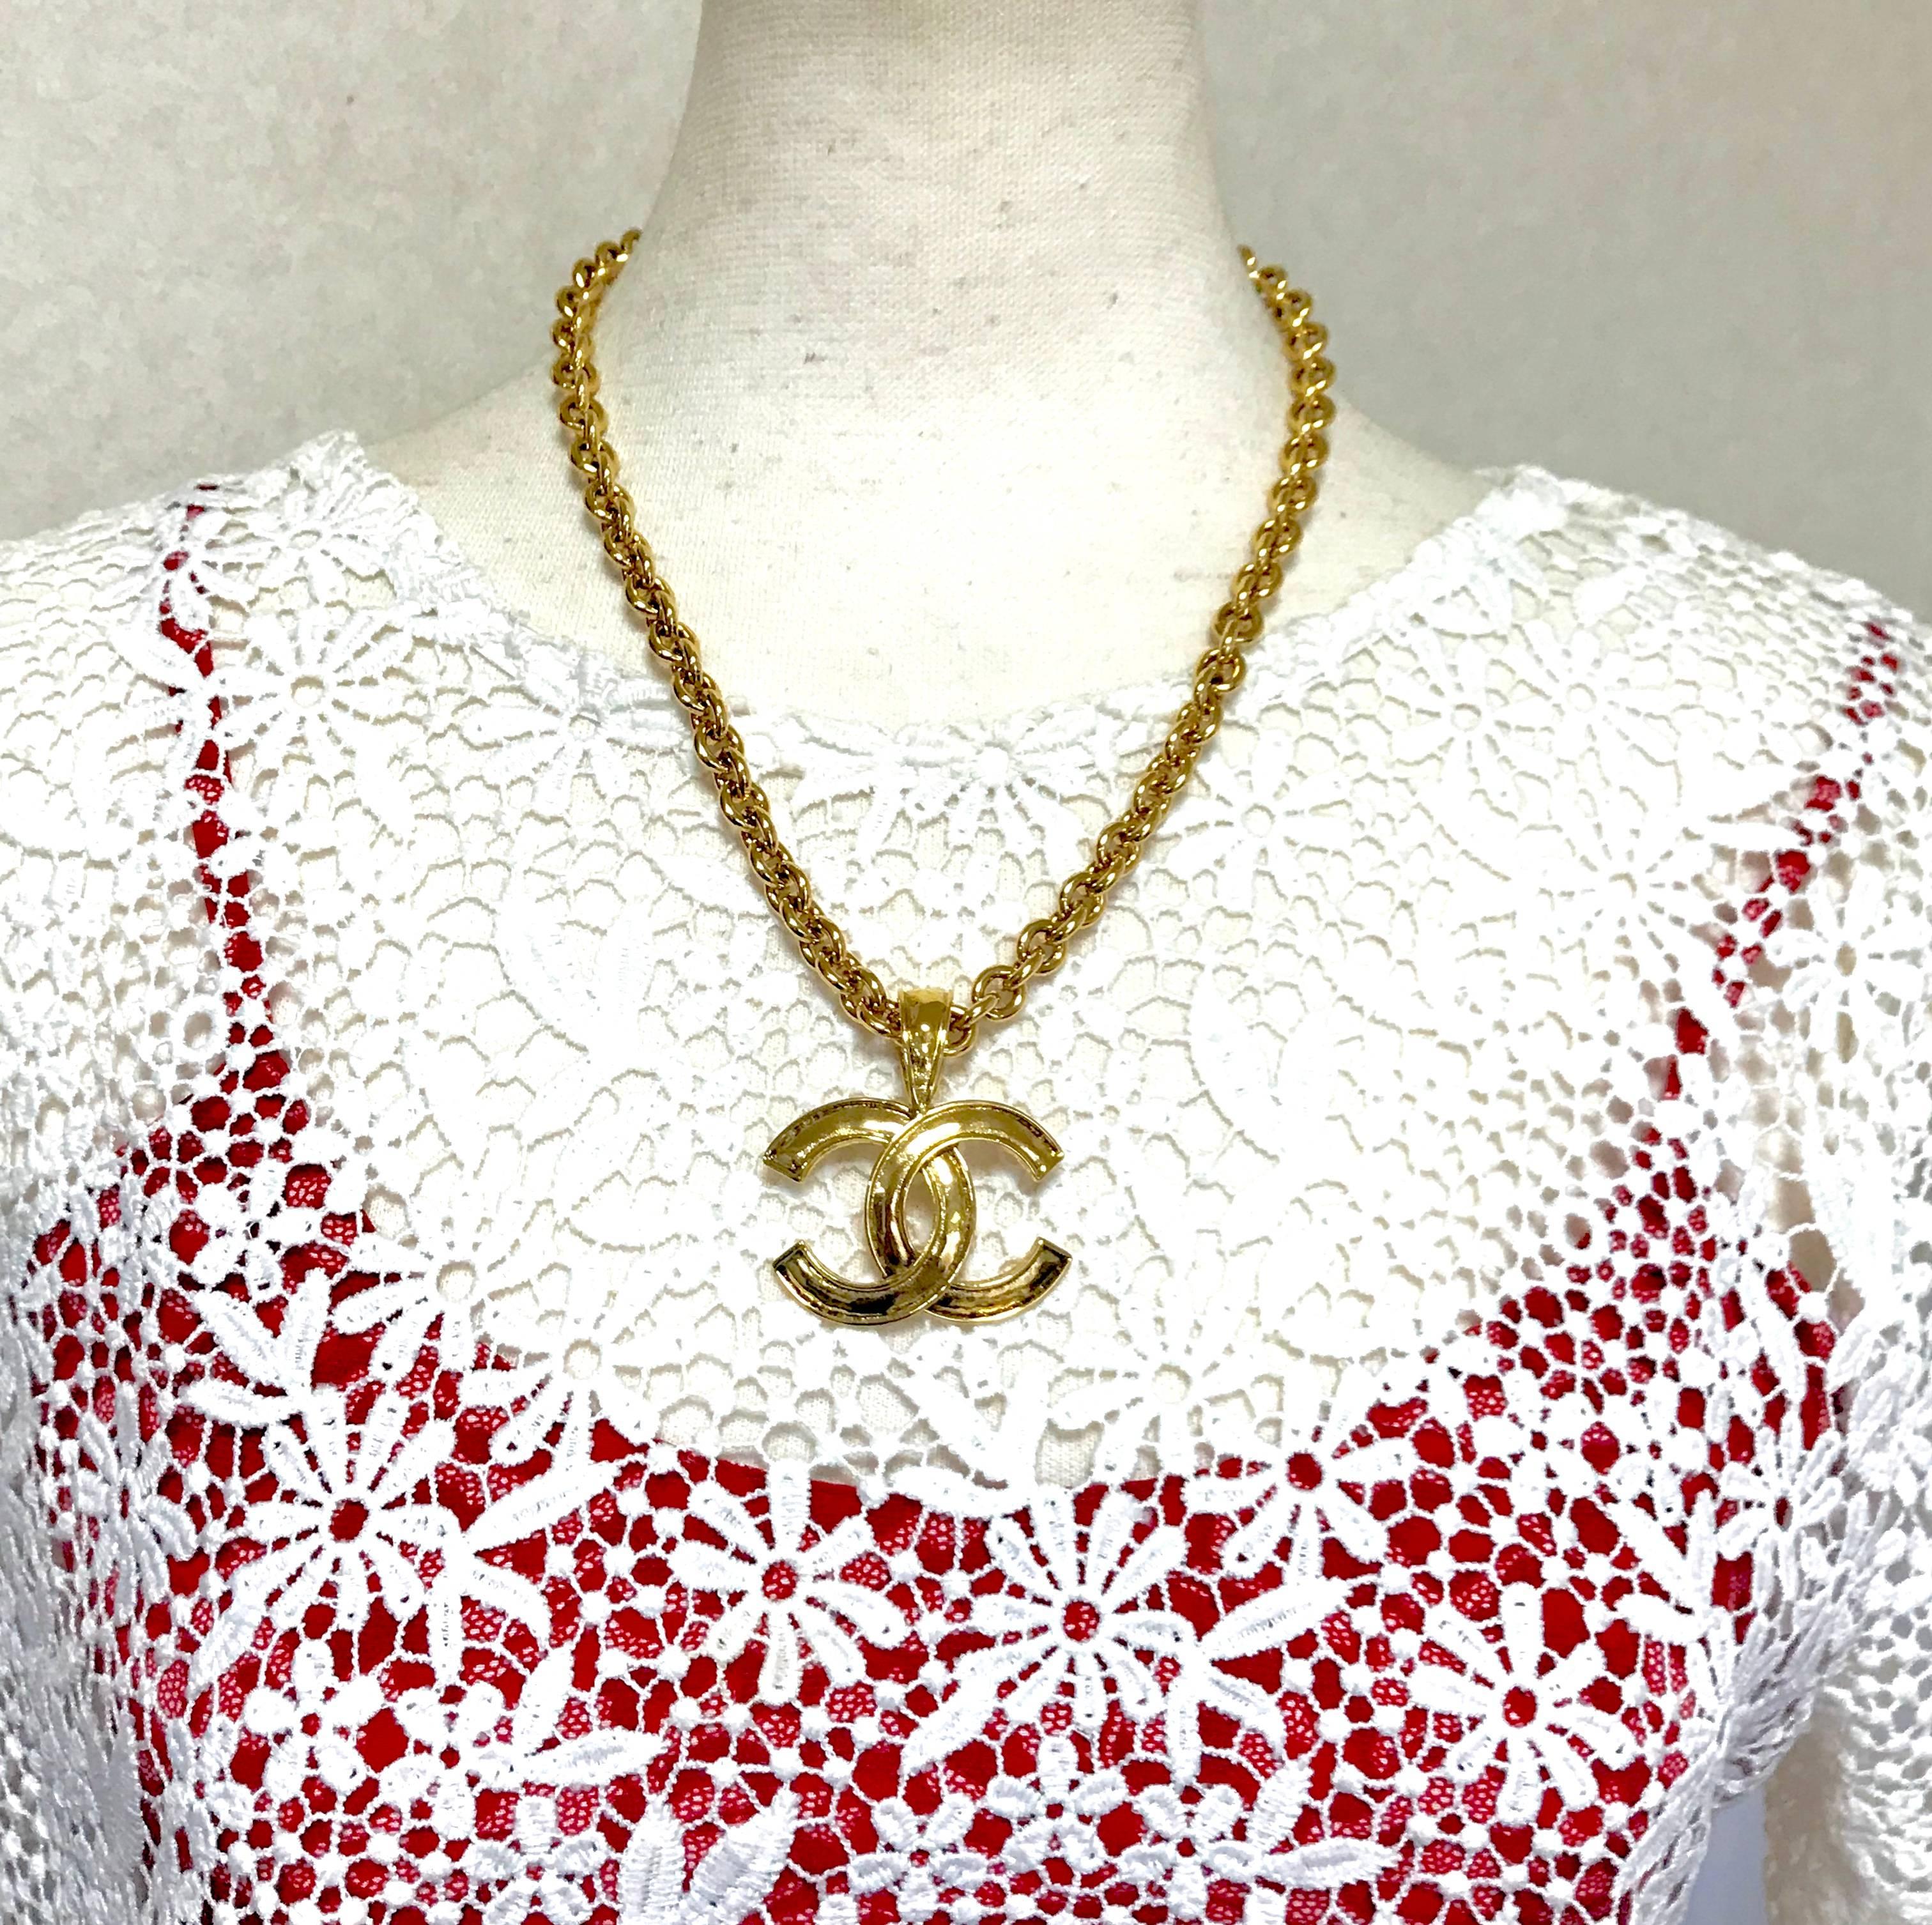 1990s. Vintage CHANEL golden chain necklace with large CC mark logo pendant top. Gorgeous jewelry. Best gift idea.

Gorgeous and classic jewelry piece from Chanel back in the 90's....
Great gift idea. 

Introducing another vintage Chanel golden